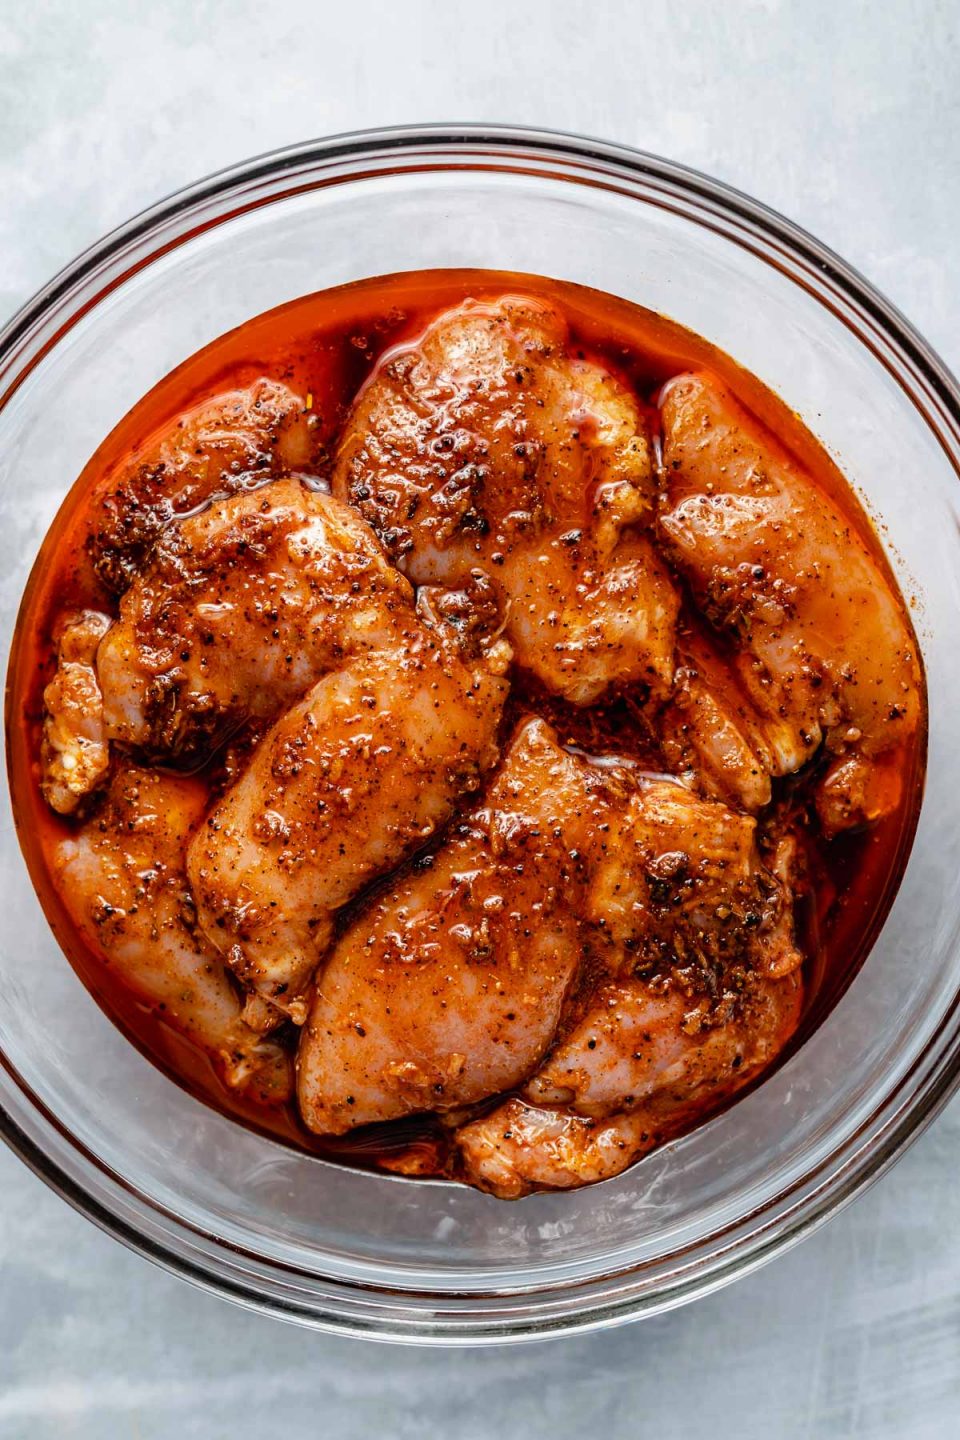 Chicken thighs in a large glass mixing bowl, marinating in Chili Lime marinade. The bowl sits atop a light blue surface.